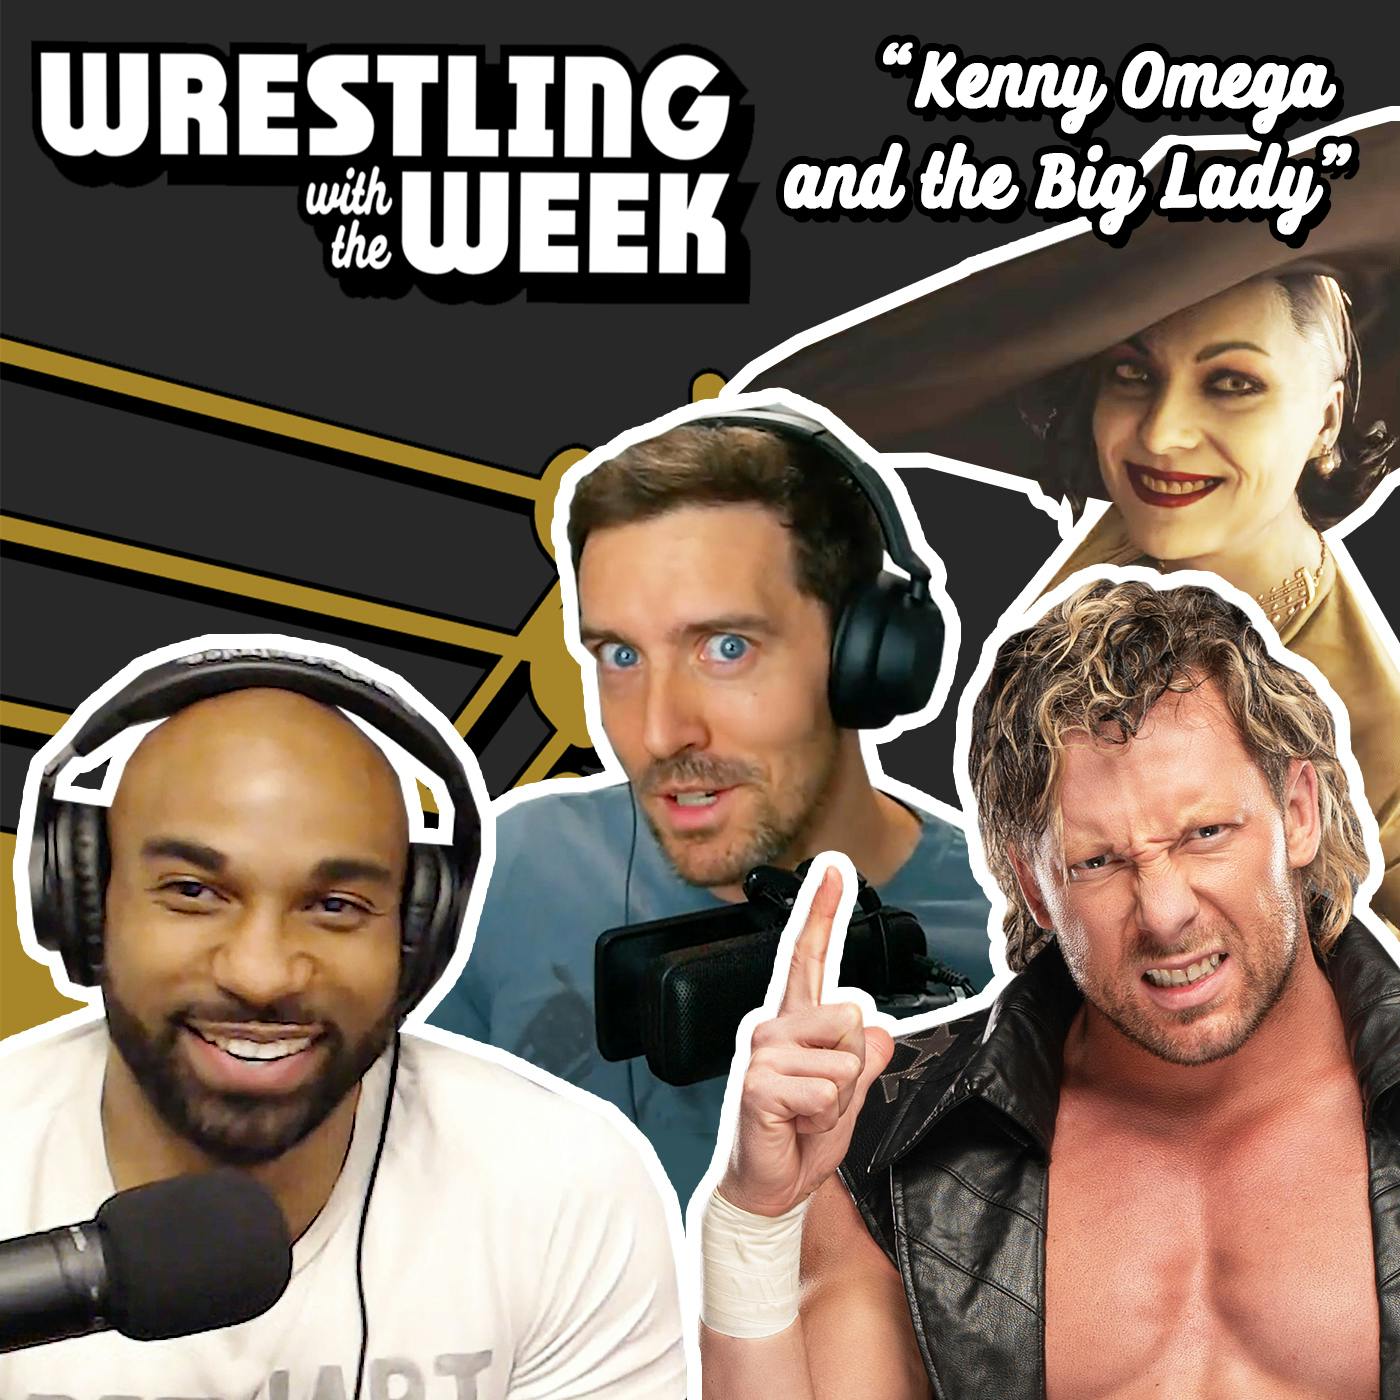 "Kenny Omega and the Big Lady"